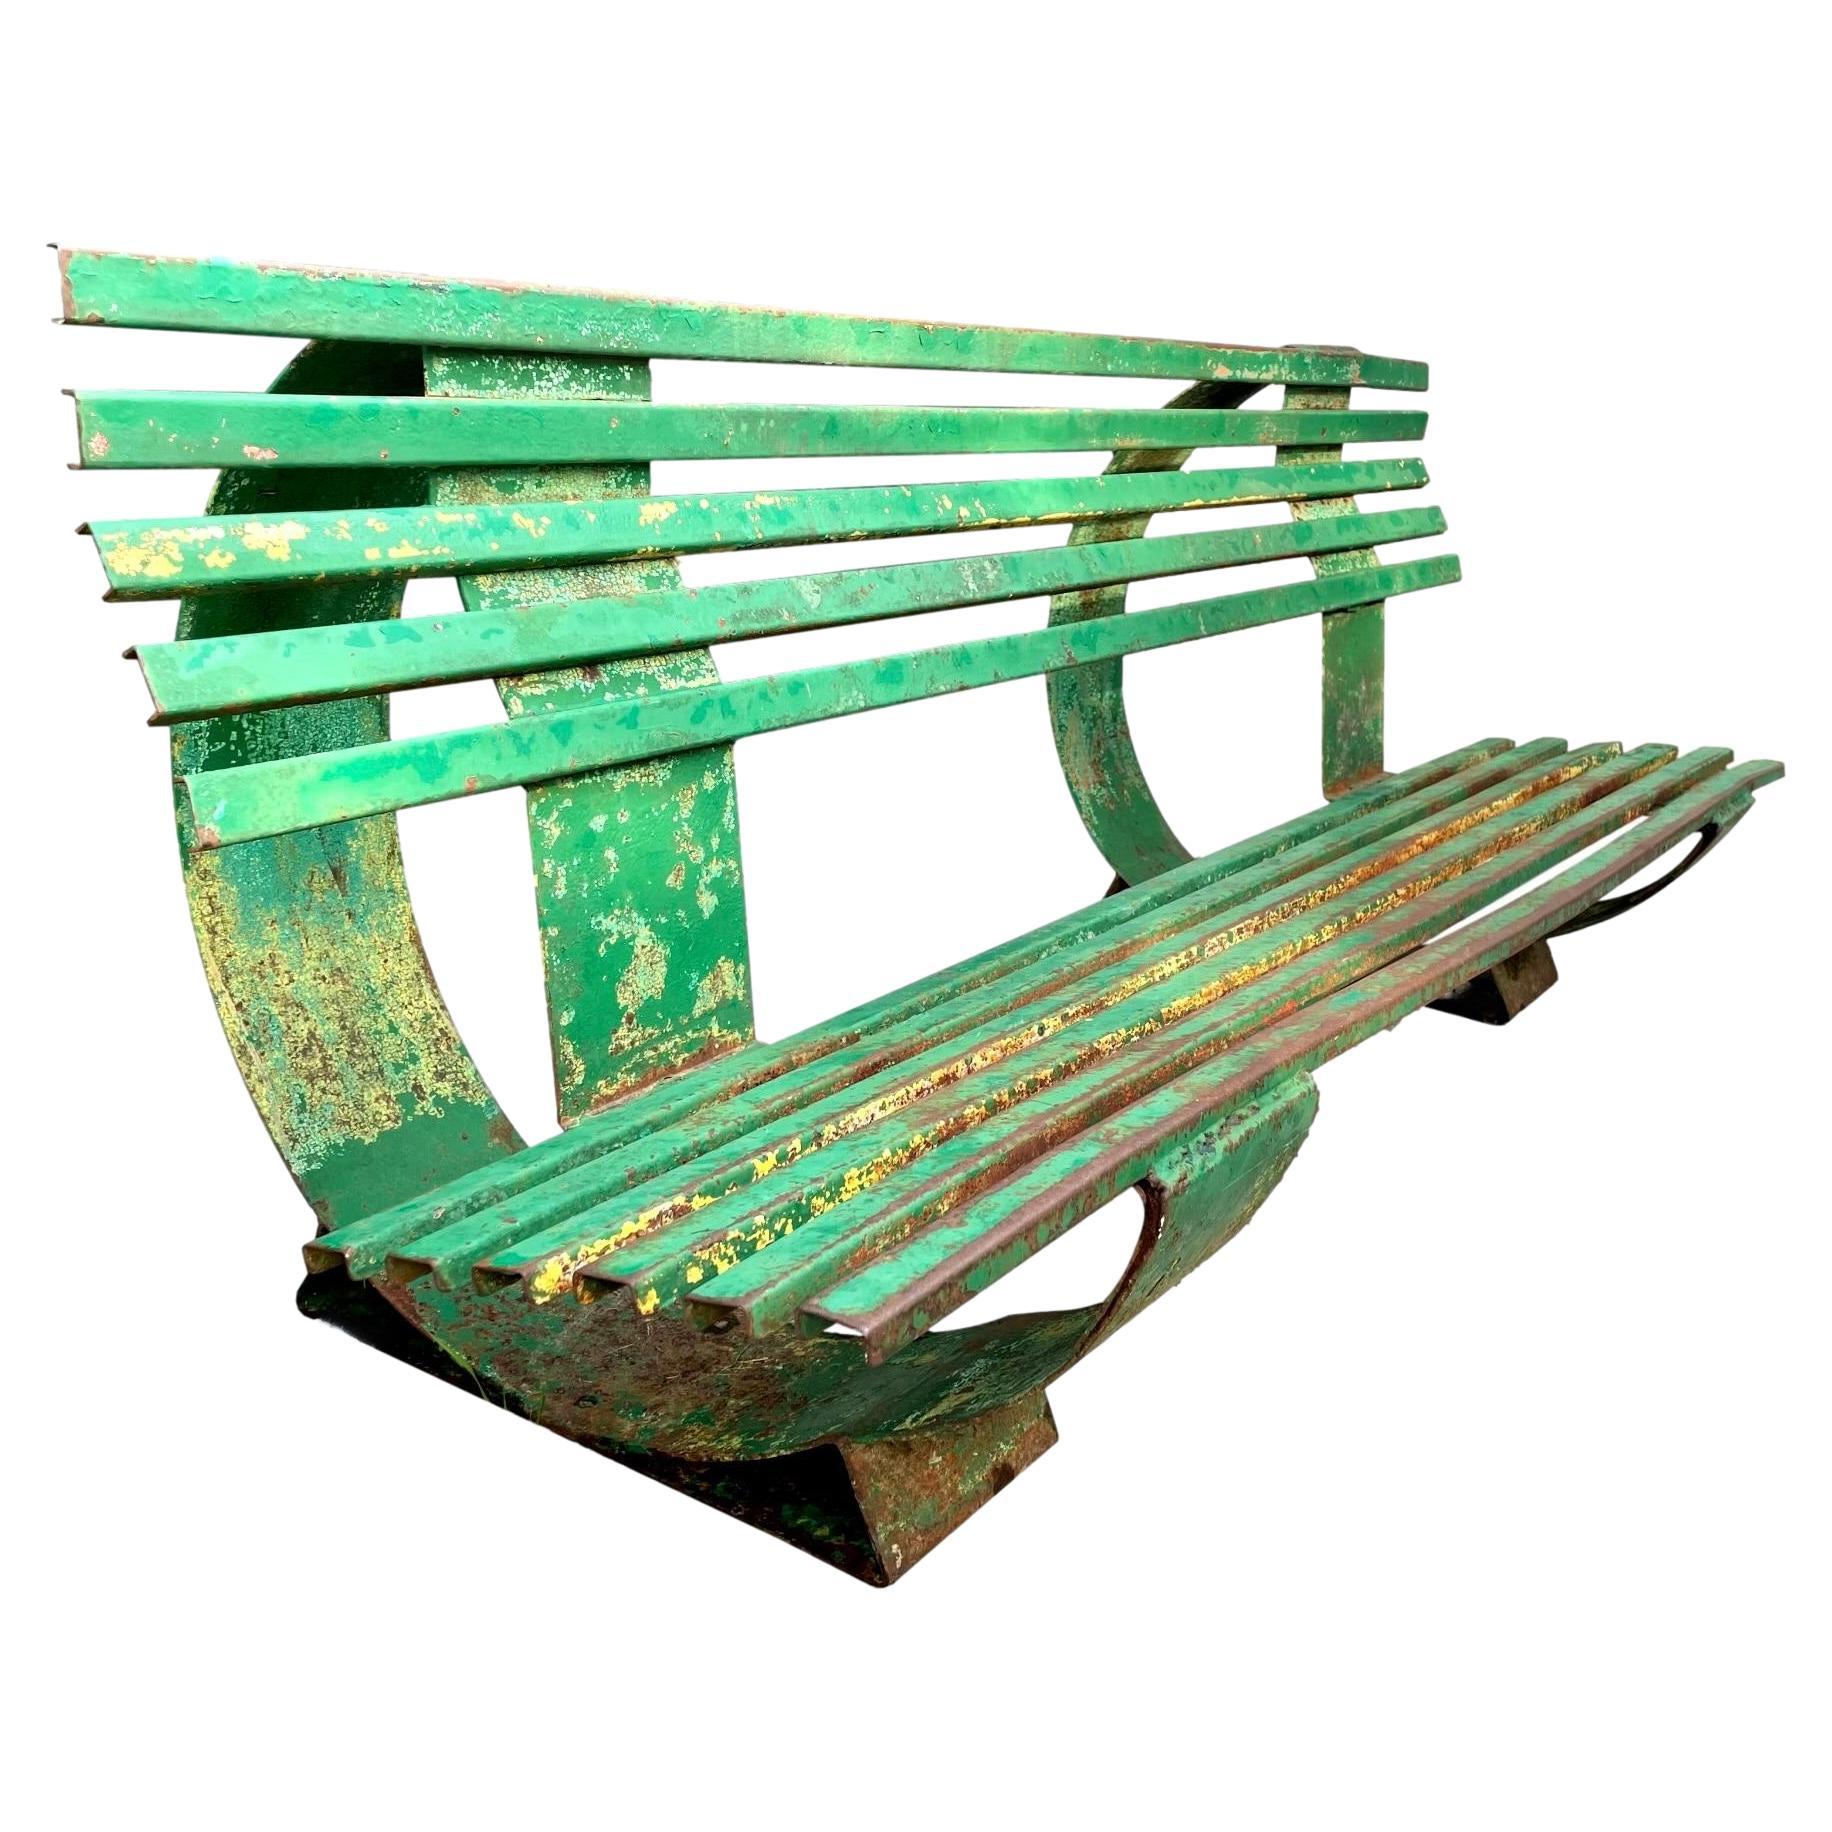 Galvanized Steel Manelco Bench, Cannes, France 1958 For Sale